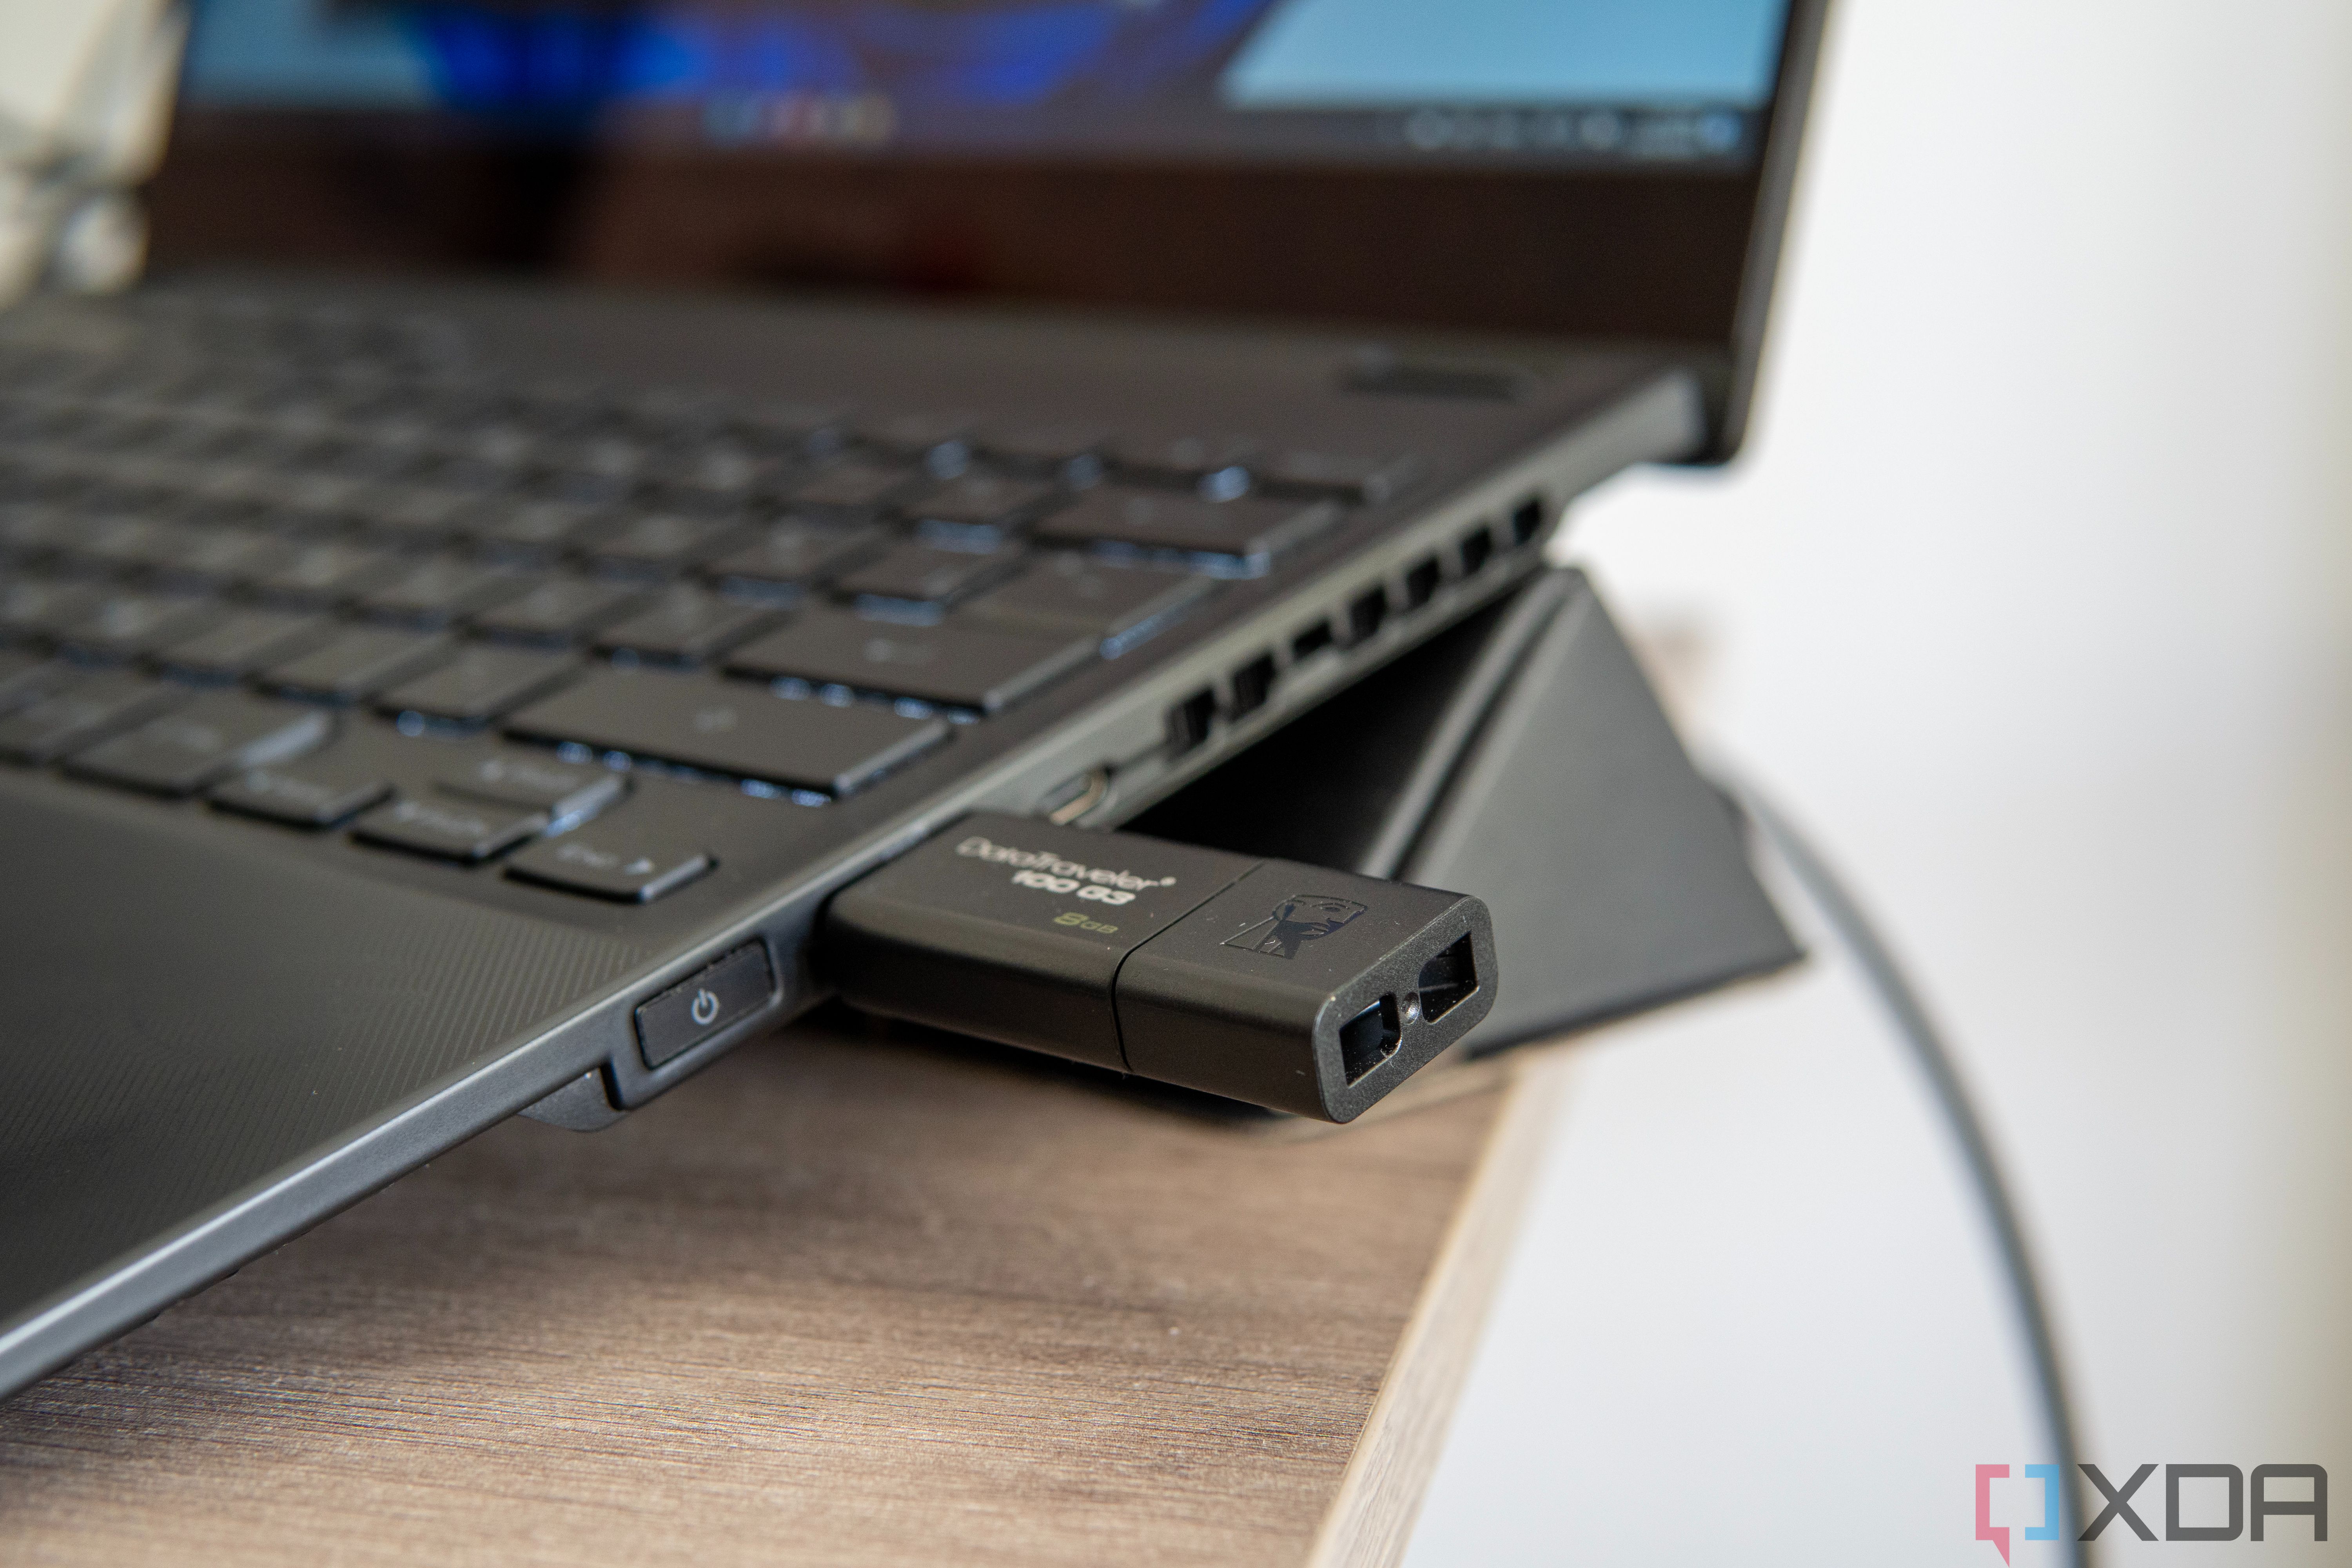 Close-up view of a USB flash drive connected to a Windows 11 laptop